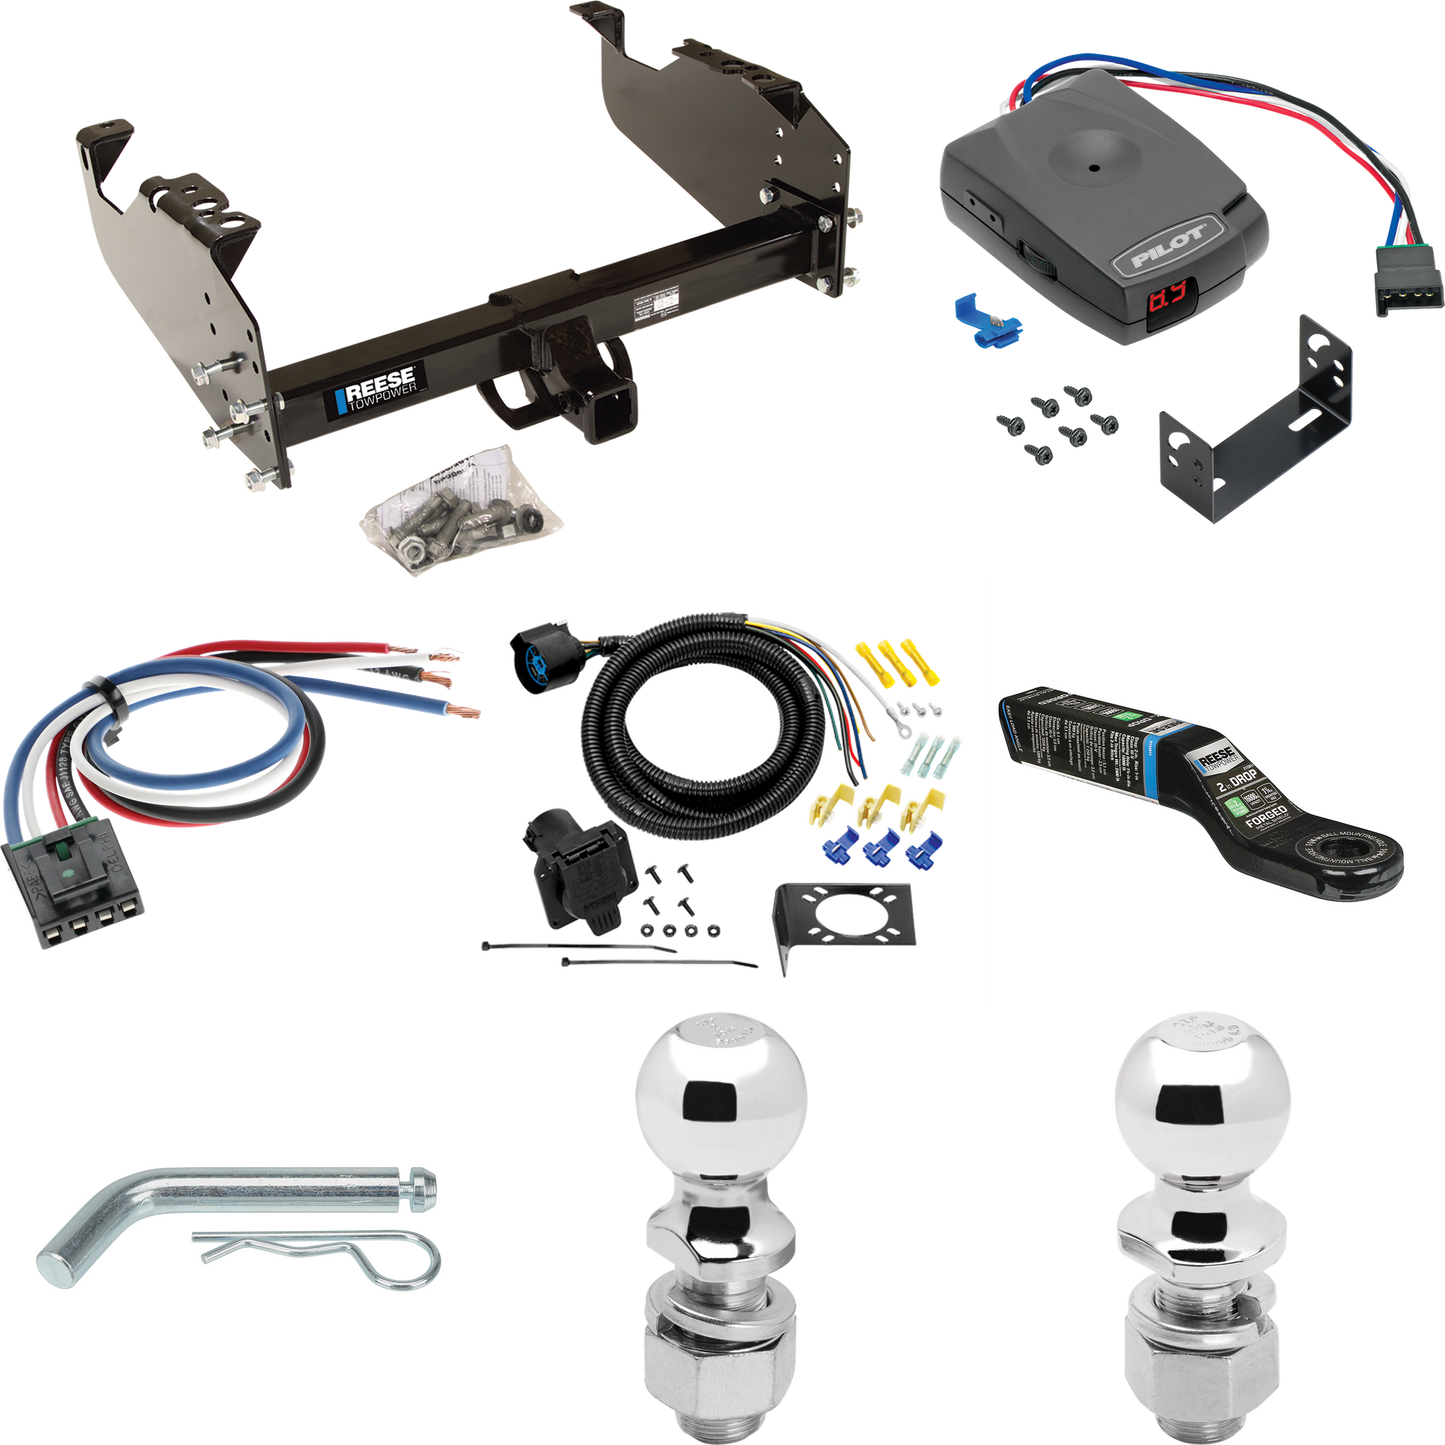 Fits 1963-1965 GMC 1500 Series Trailer Hitch Tow PKG w/ Pro Series Pilot Brake Control + Generic BC Wiring Adapter + 7-Way RV Wiring + 2" & 2-5/16" Ball & Drop Mount By Reese Towpower